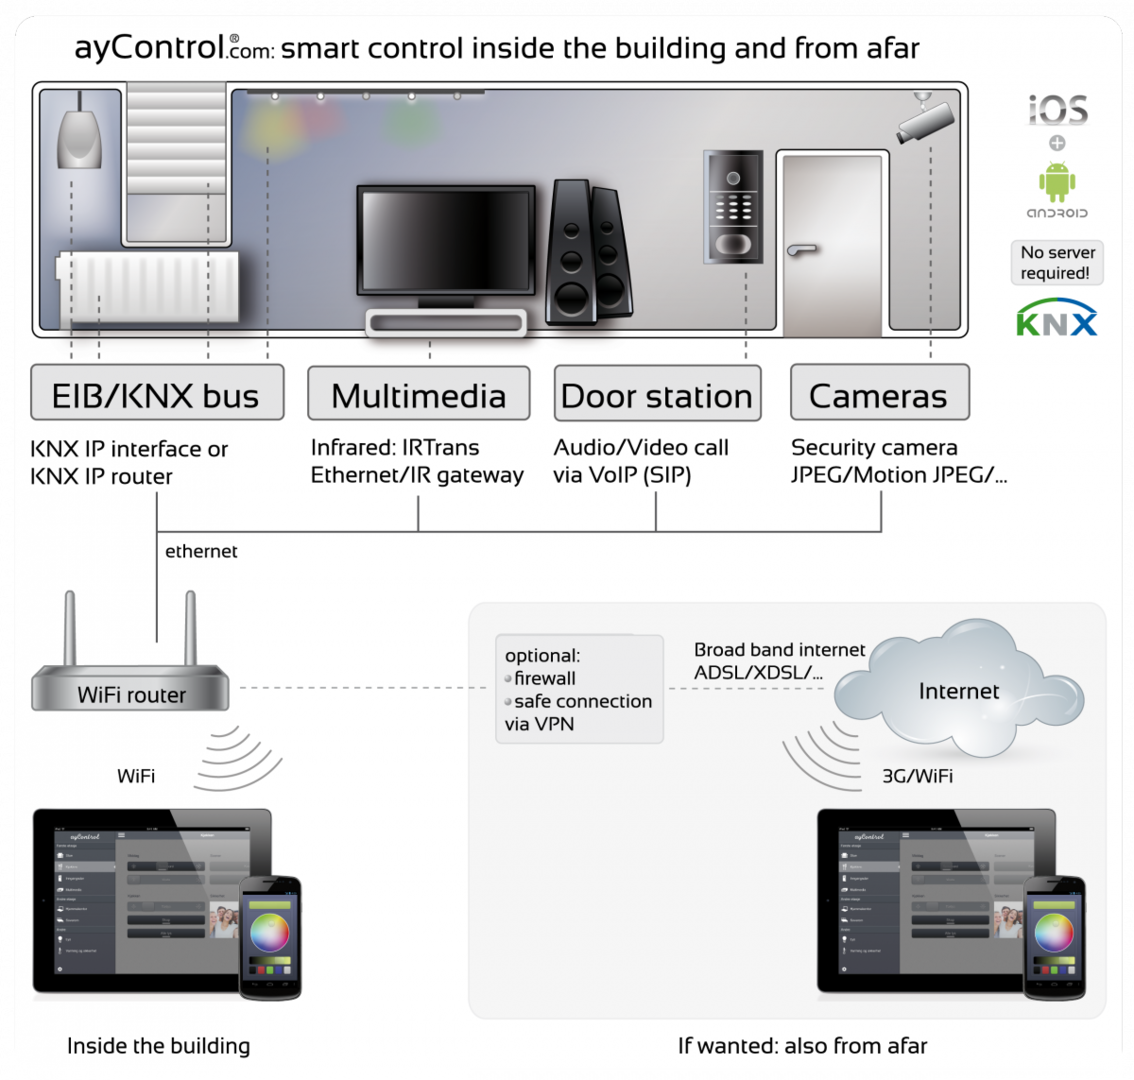 ayControl_KNX_smart_control_inside_the_building_and_from_afar_en-01.png